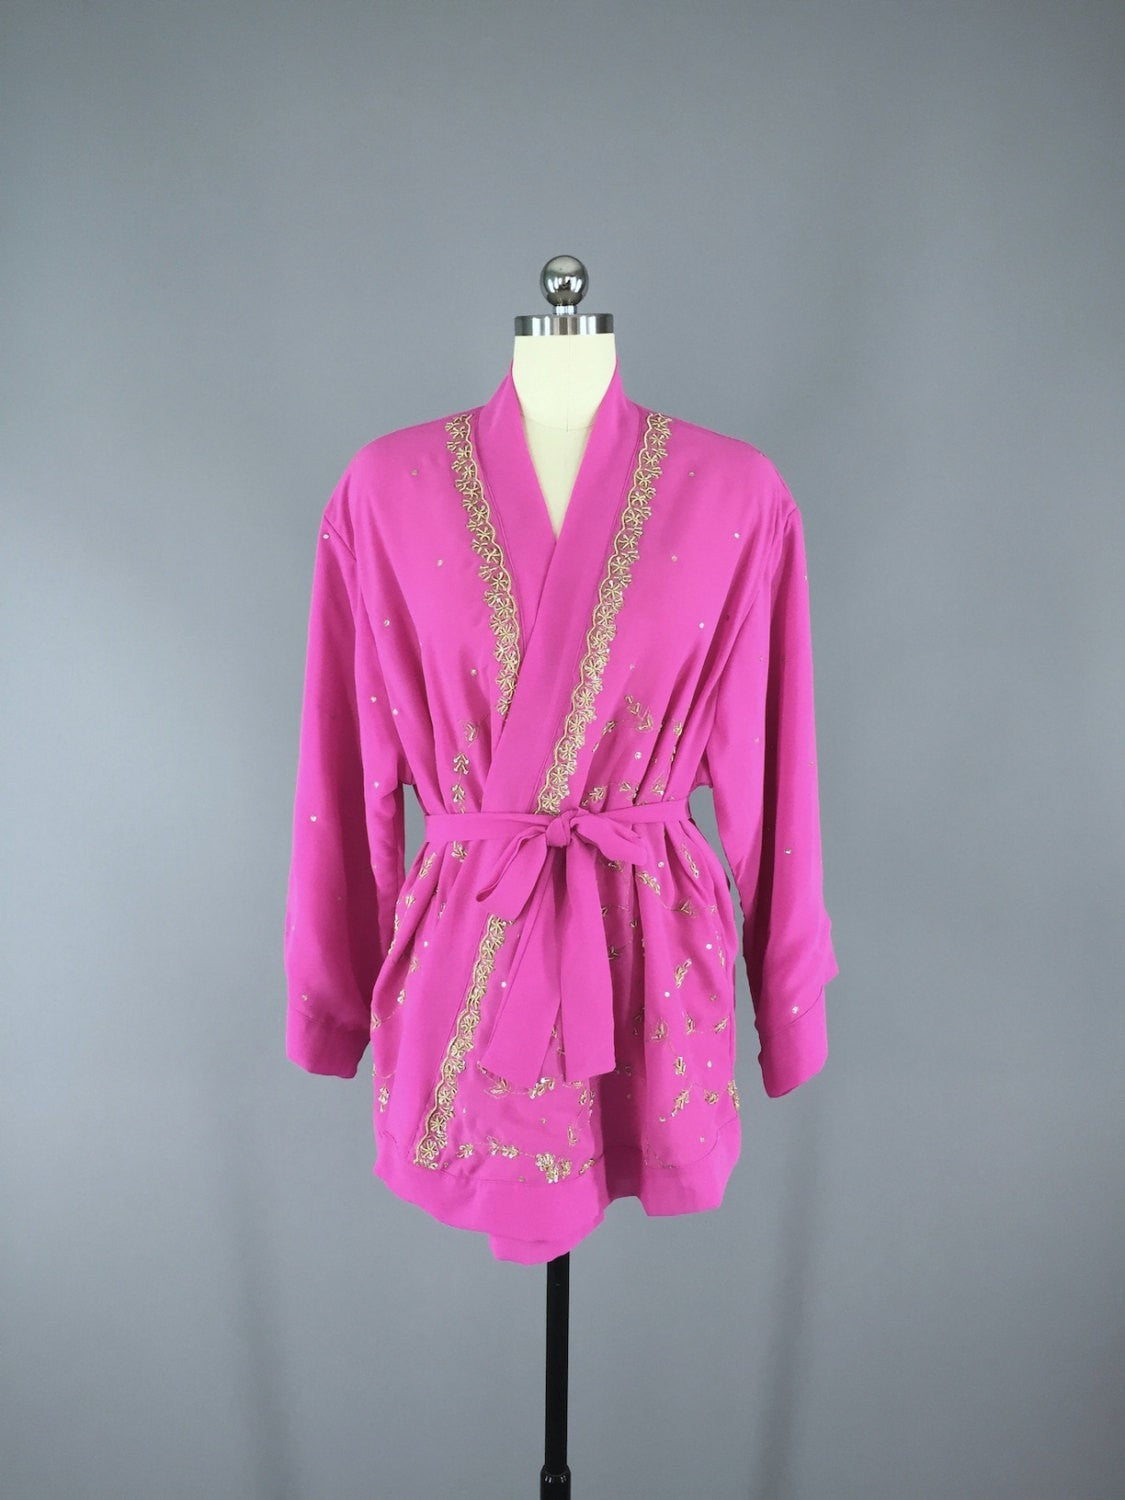 Bright Pink Georgette Kimono Cardigan made from a Vintage Indian Sari - ThisBlueBird